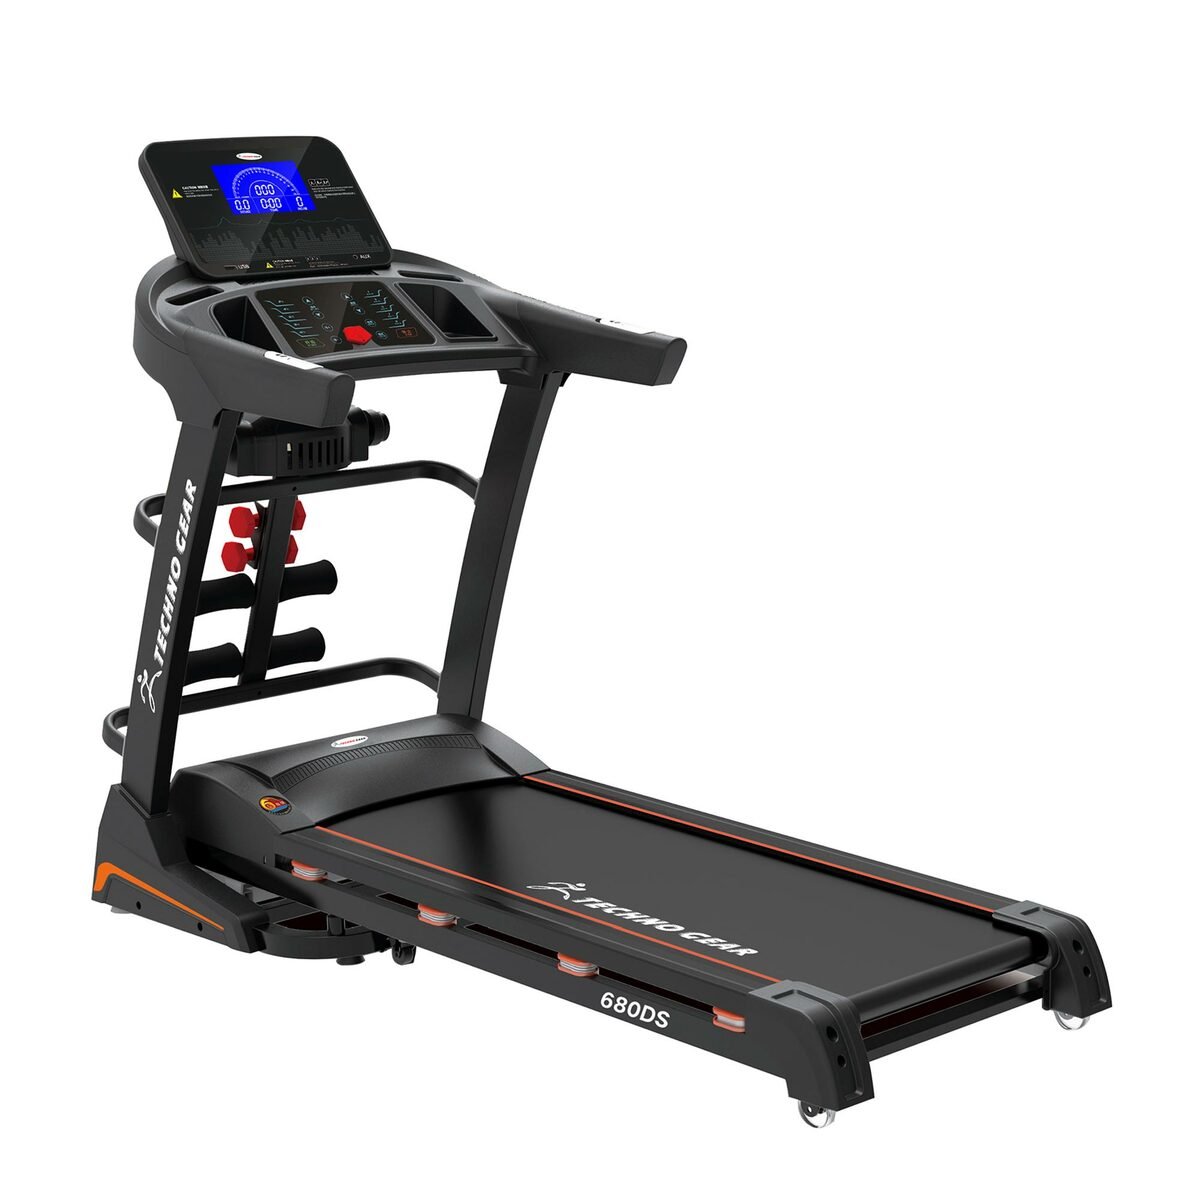 Techno Gear Electric Treadmill With Massager 680DS 3HP